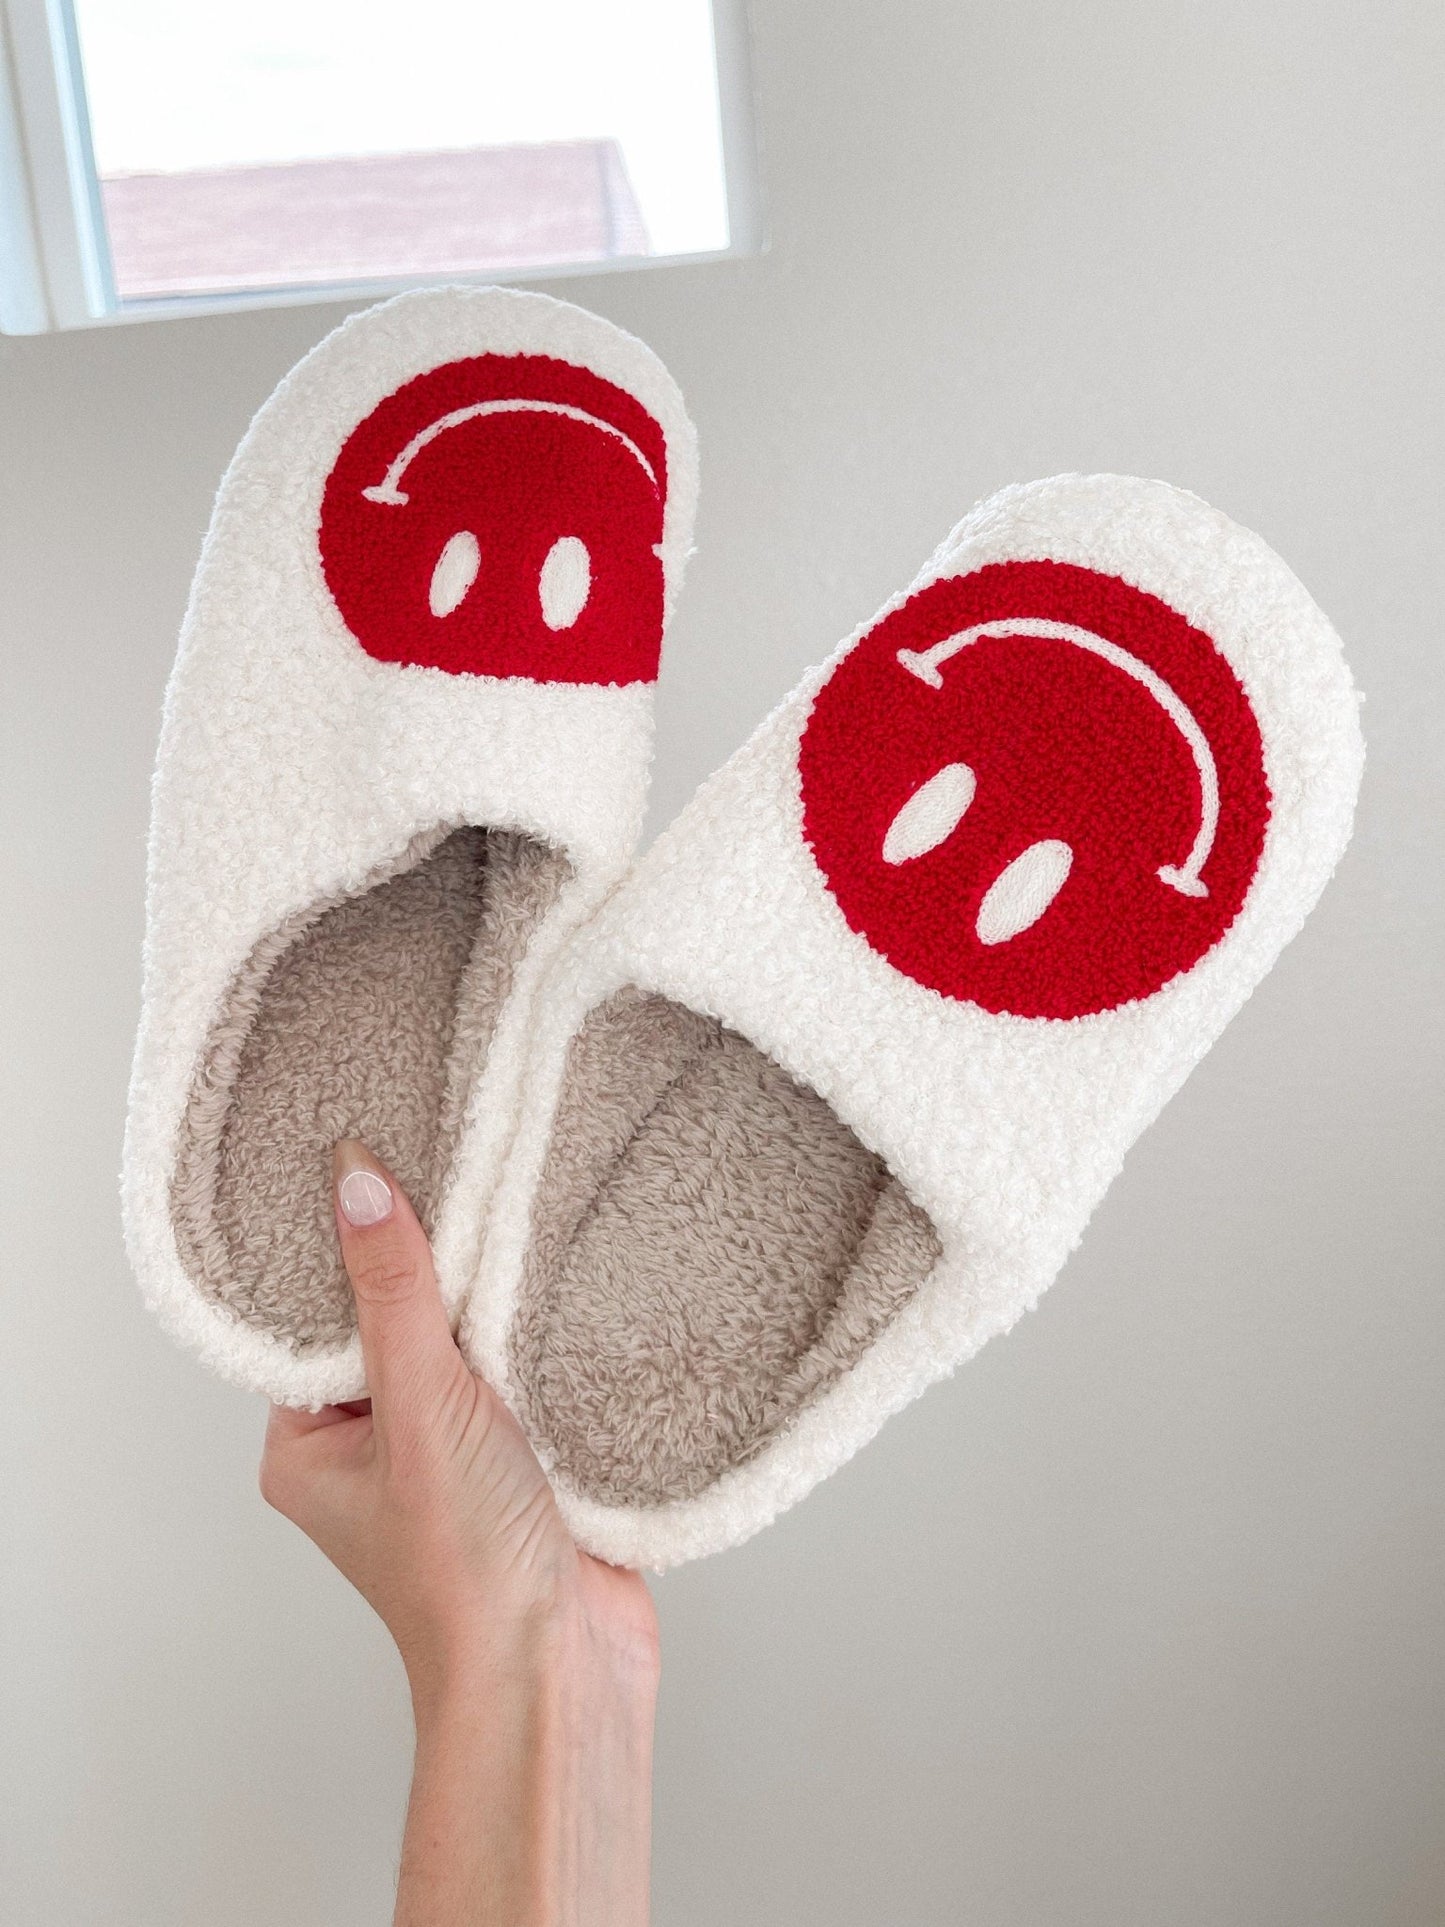 Christmas Slippers | Red Smiley Slippers | Mom Slippers | Fuzzy Slippers | Smiley Face | Christmas Gift | Cozy Christmas - Shop Donuts and Daisies